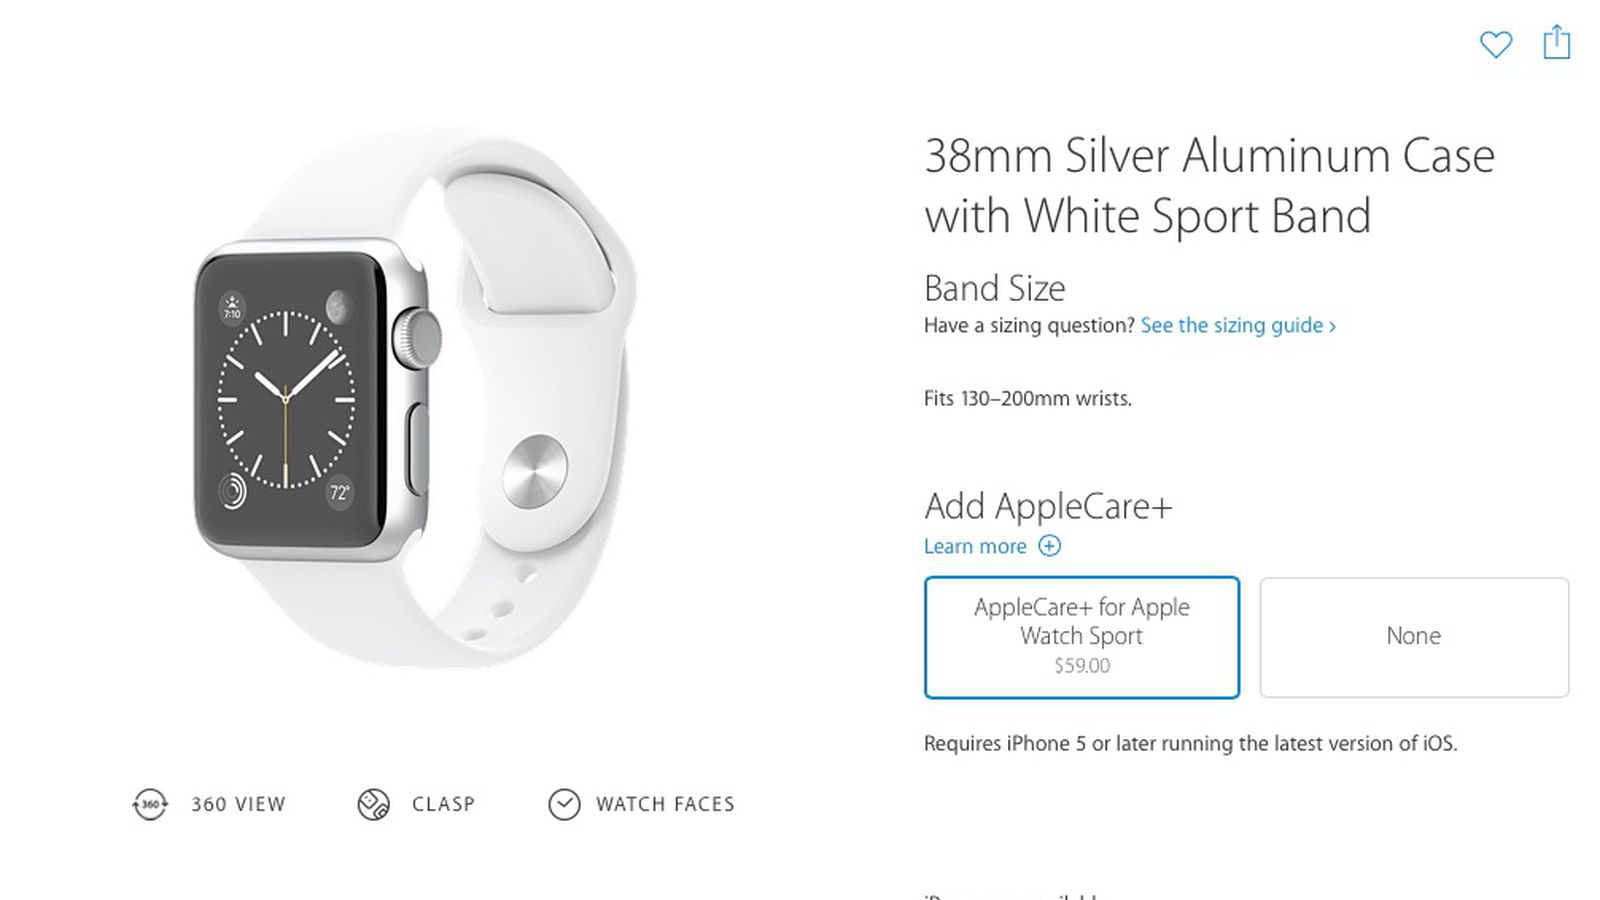 Does AppleCare Cover Lost Apple Watches? 1